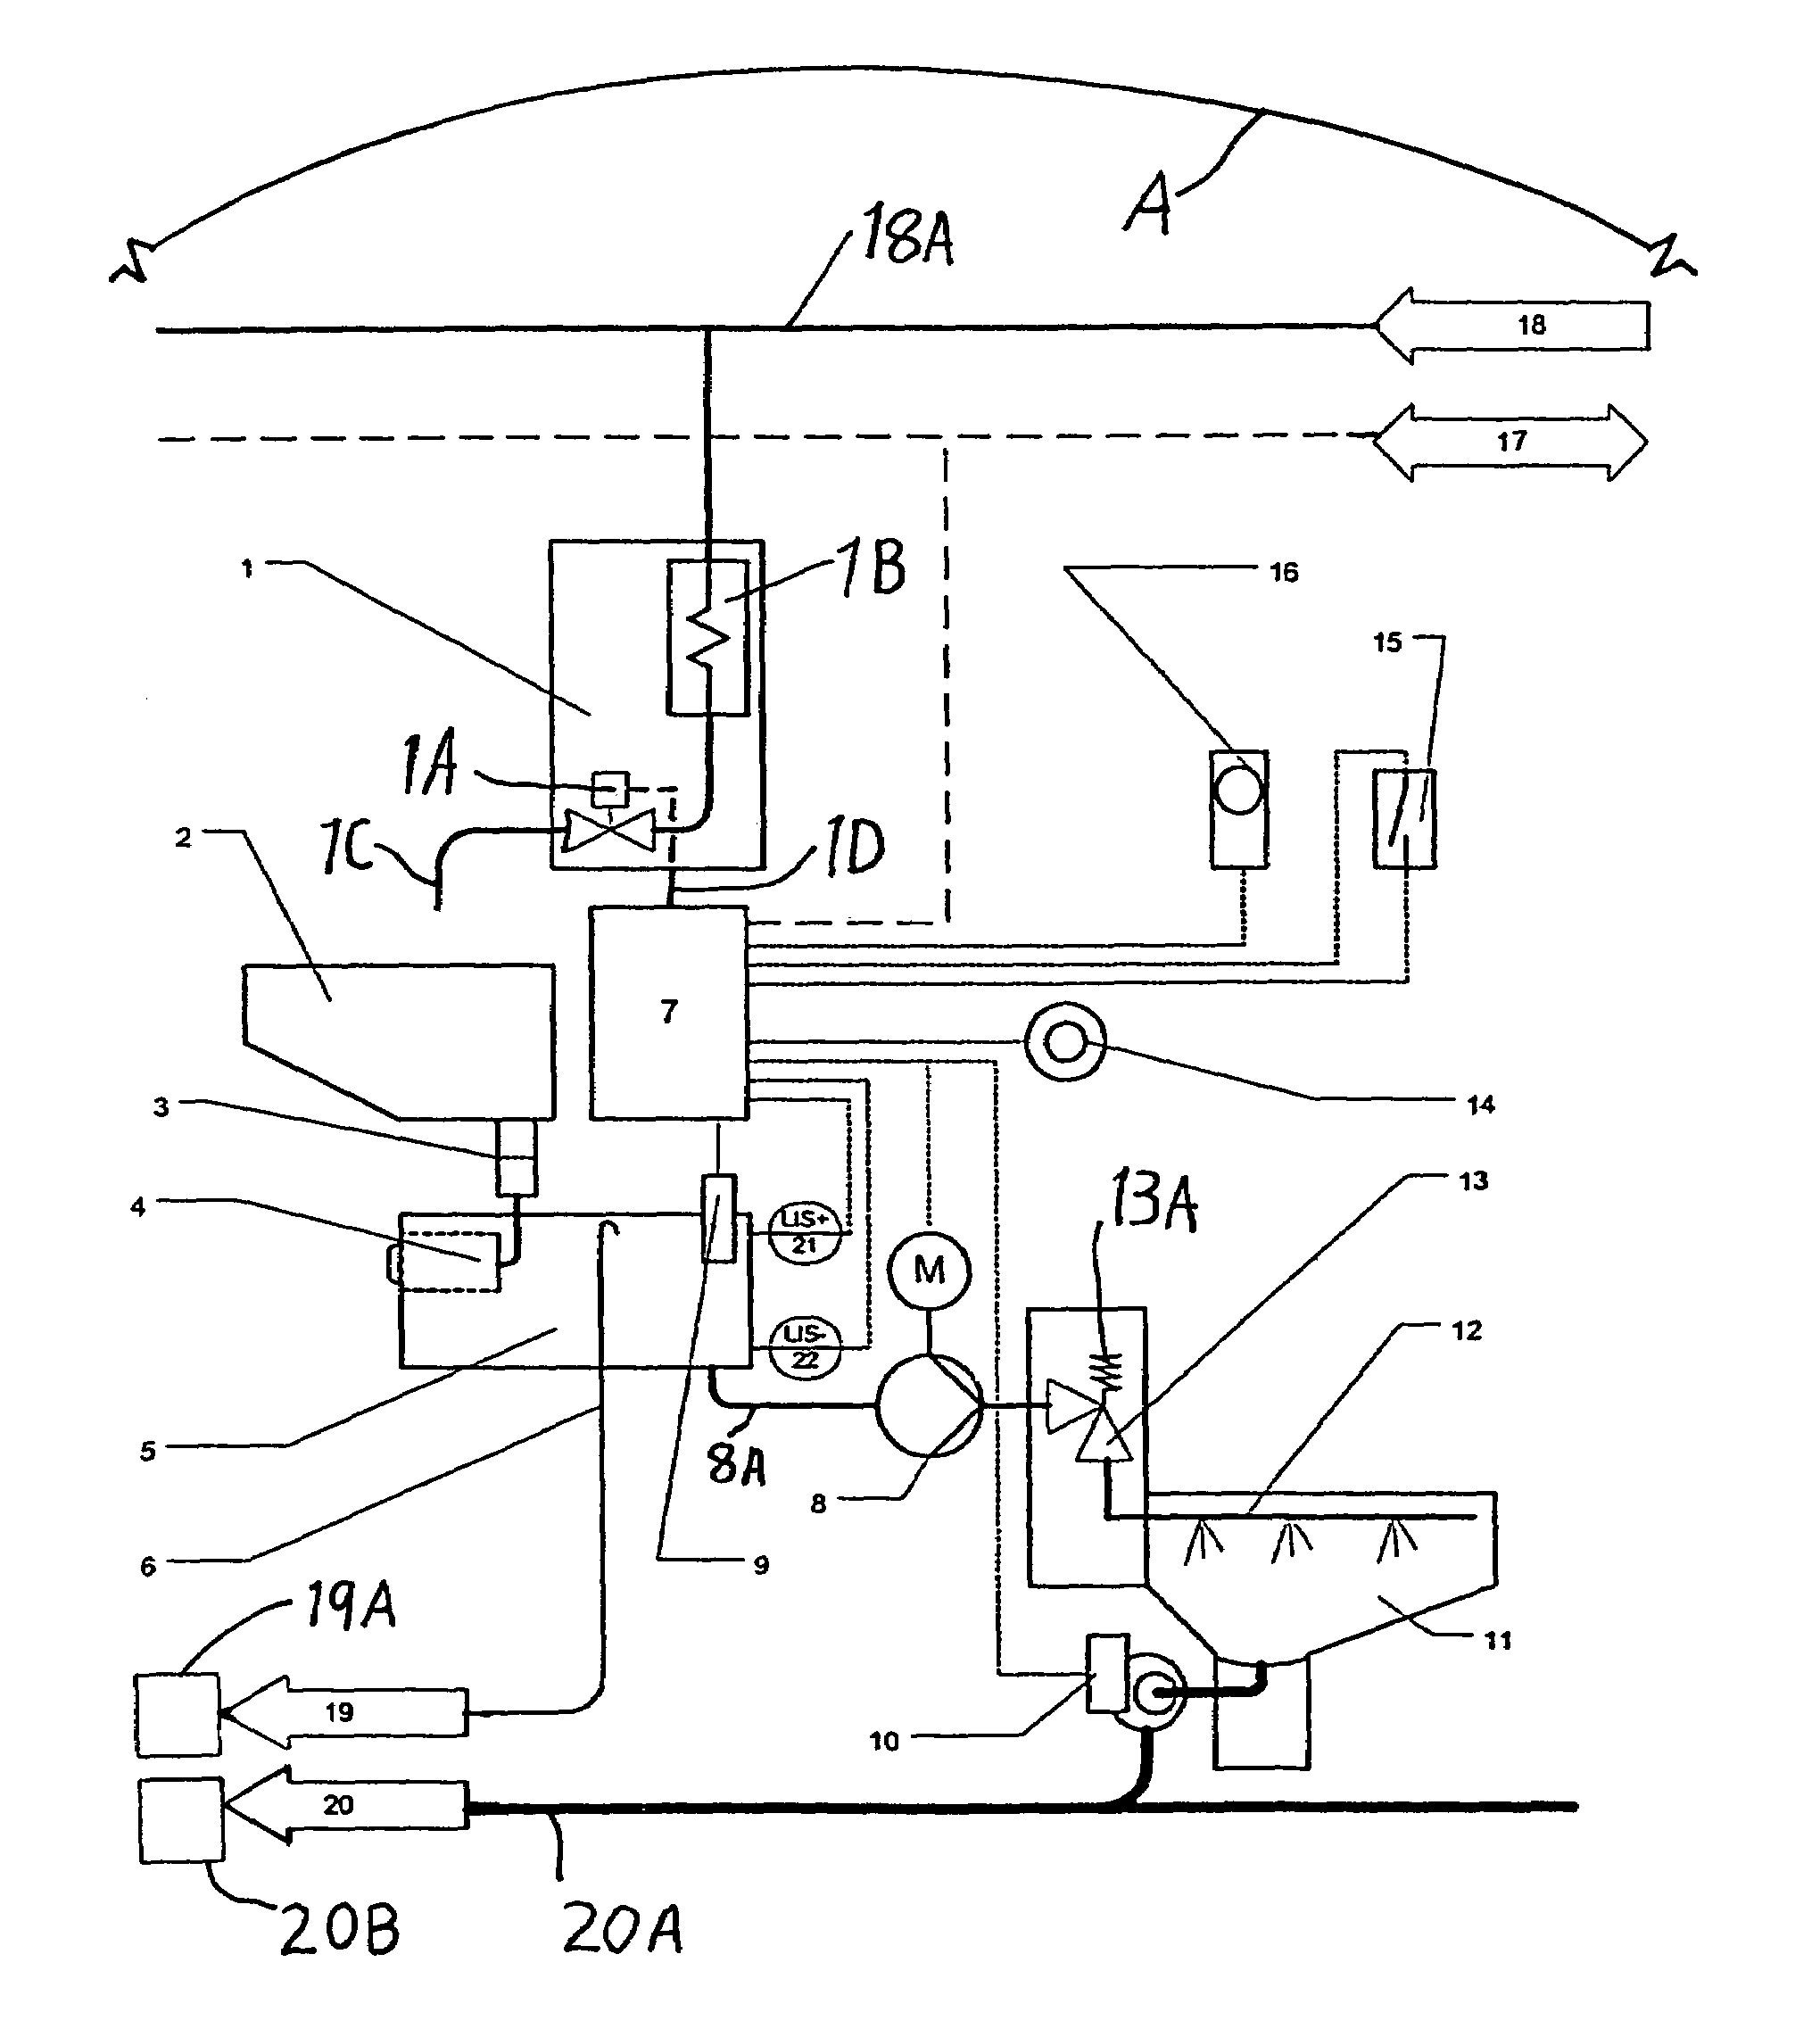 Method and apparatus for processing and re-using of gray water for flushing toilets